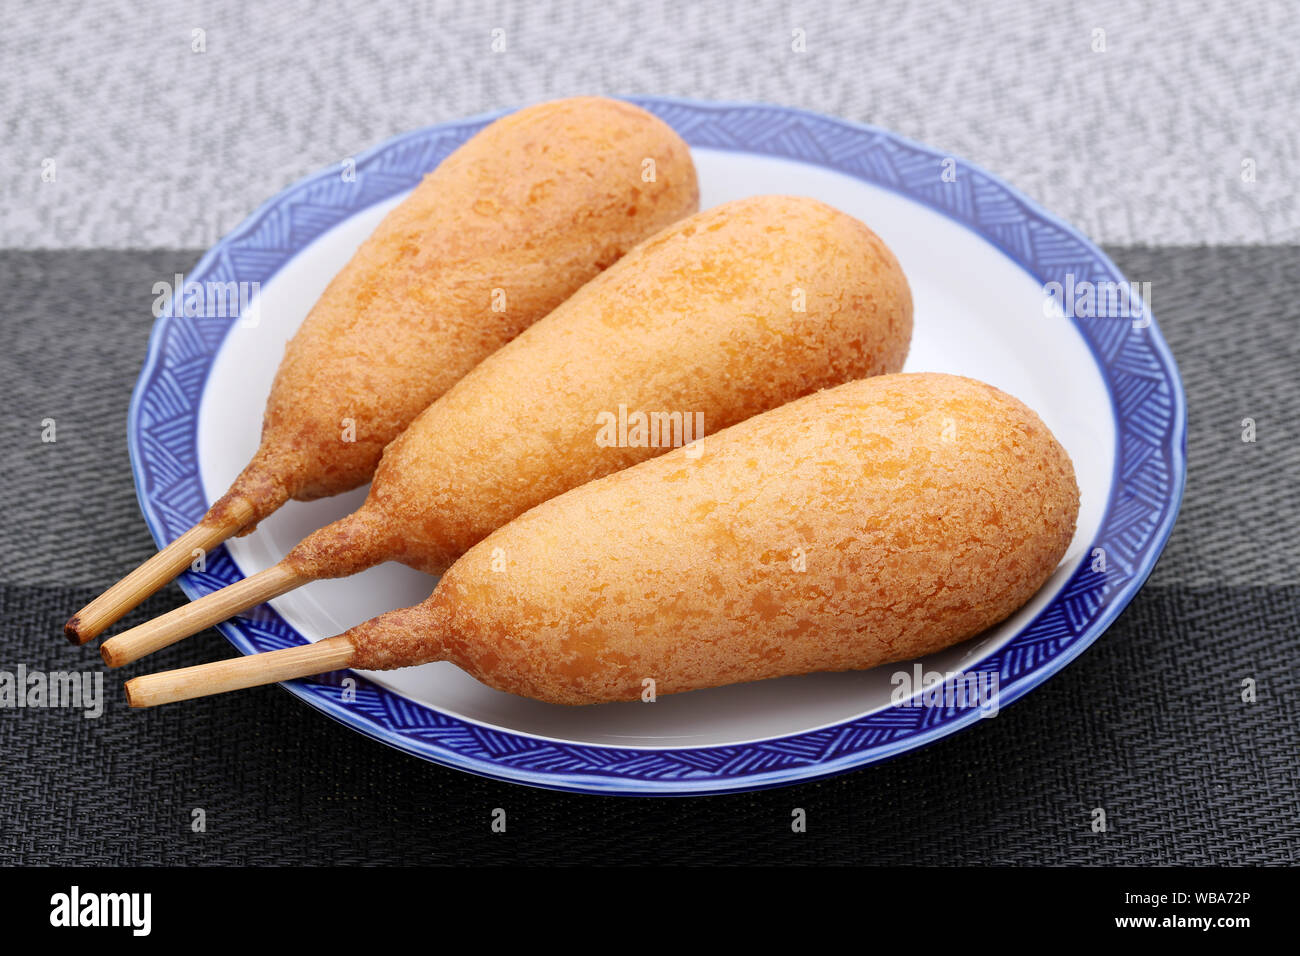 Corn dogs on a plate. This food is called American dog all over Japan. Stock Photo